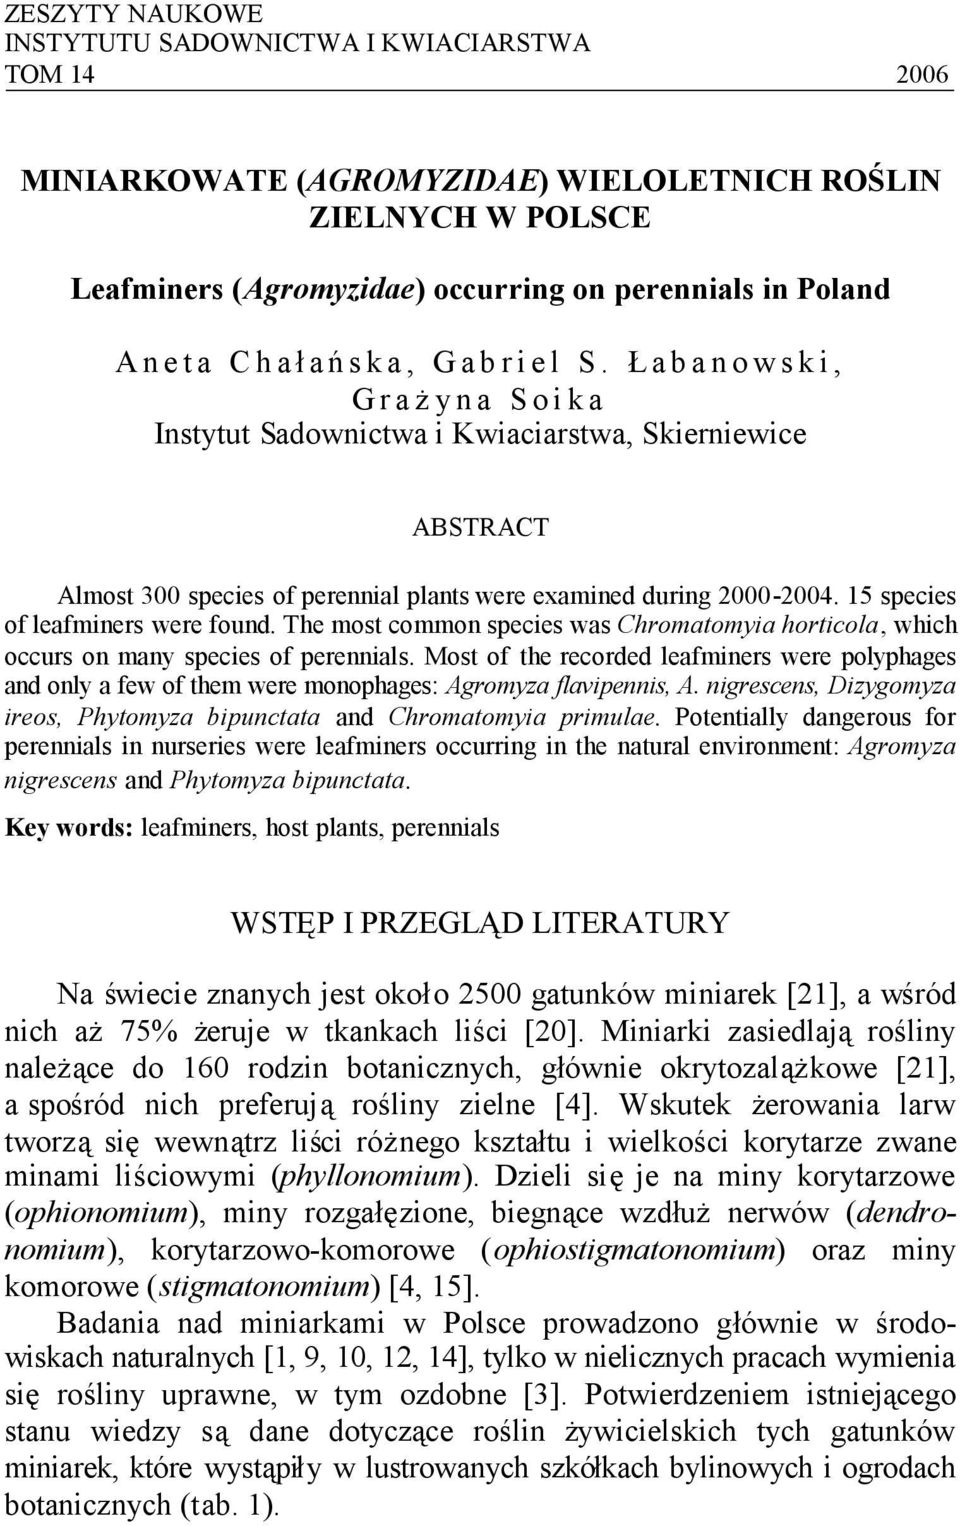 Ła b a n o w s k i, G r a ży n a S o i k a Instytut Sadownictwa i Kwiaciarstwa, Skierniewice ABSTRACT Almost 300 species of perennial plants were examined during 2000-2004.